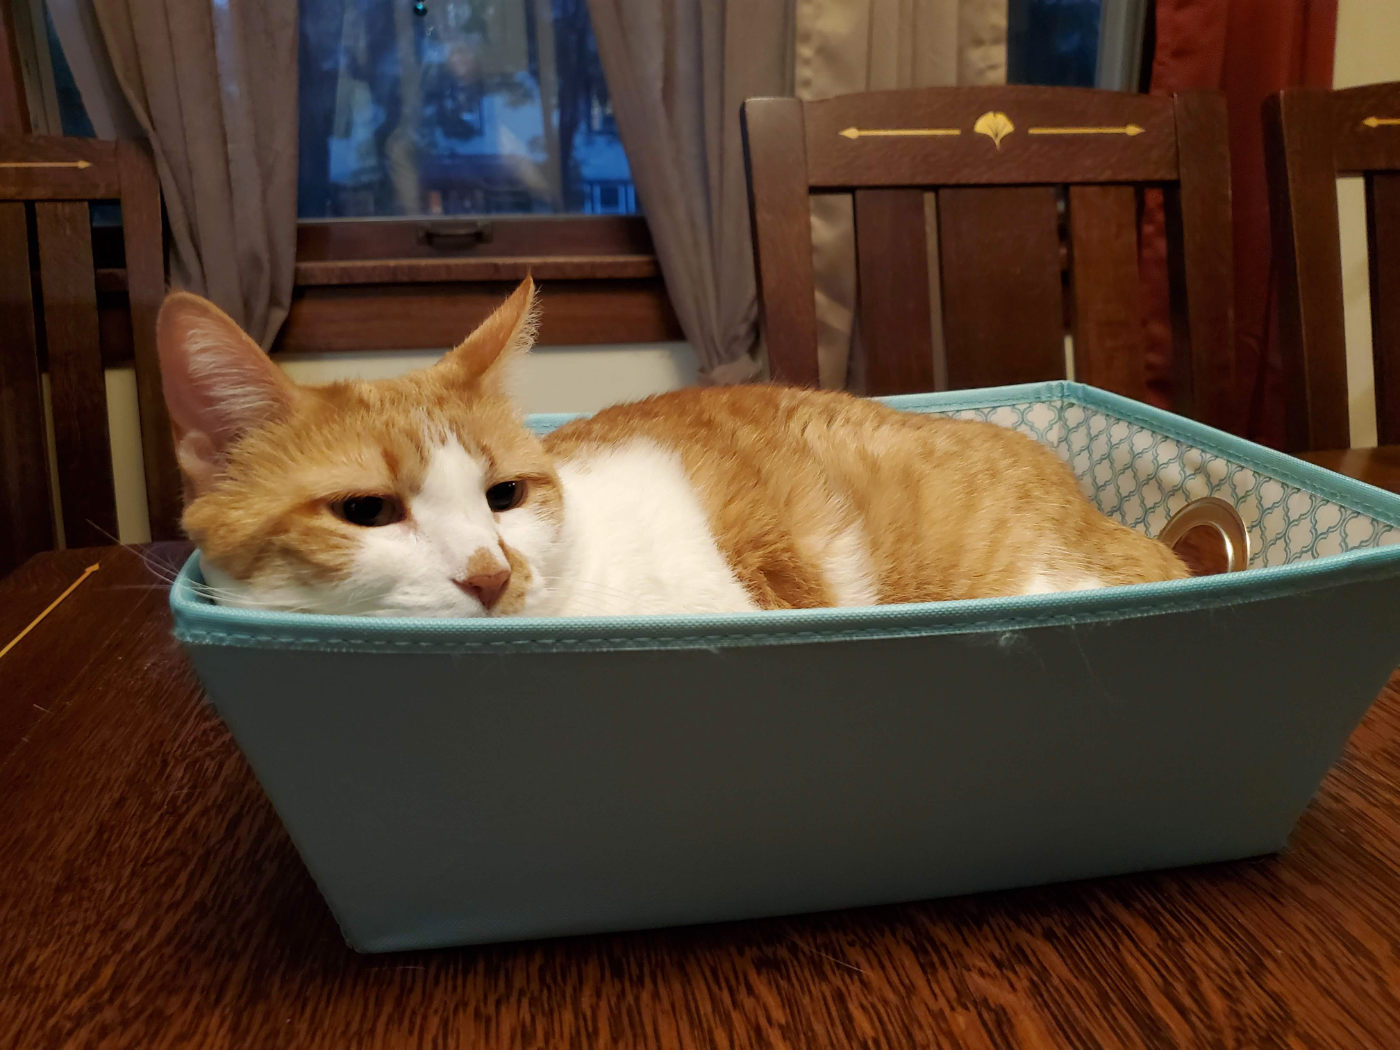 orange and white cat peaking out of a square basket on a wooden tablet